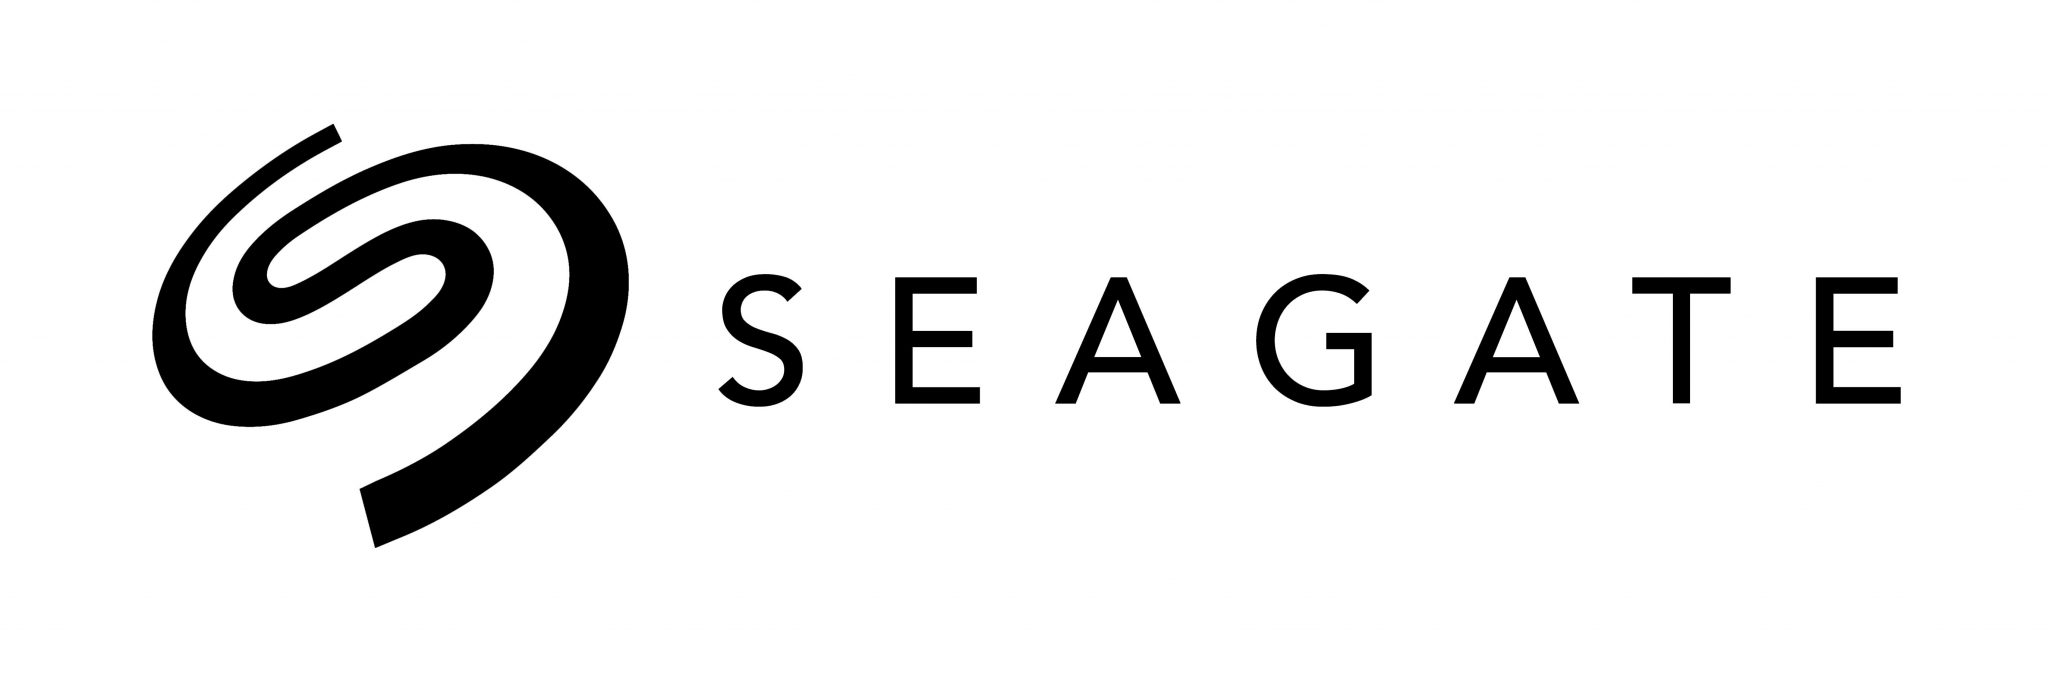 SEAGATE(シーゲイト)